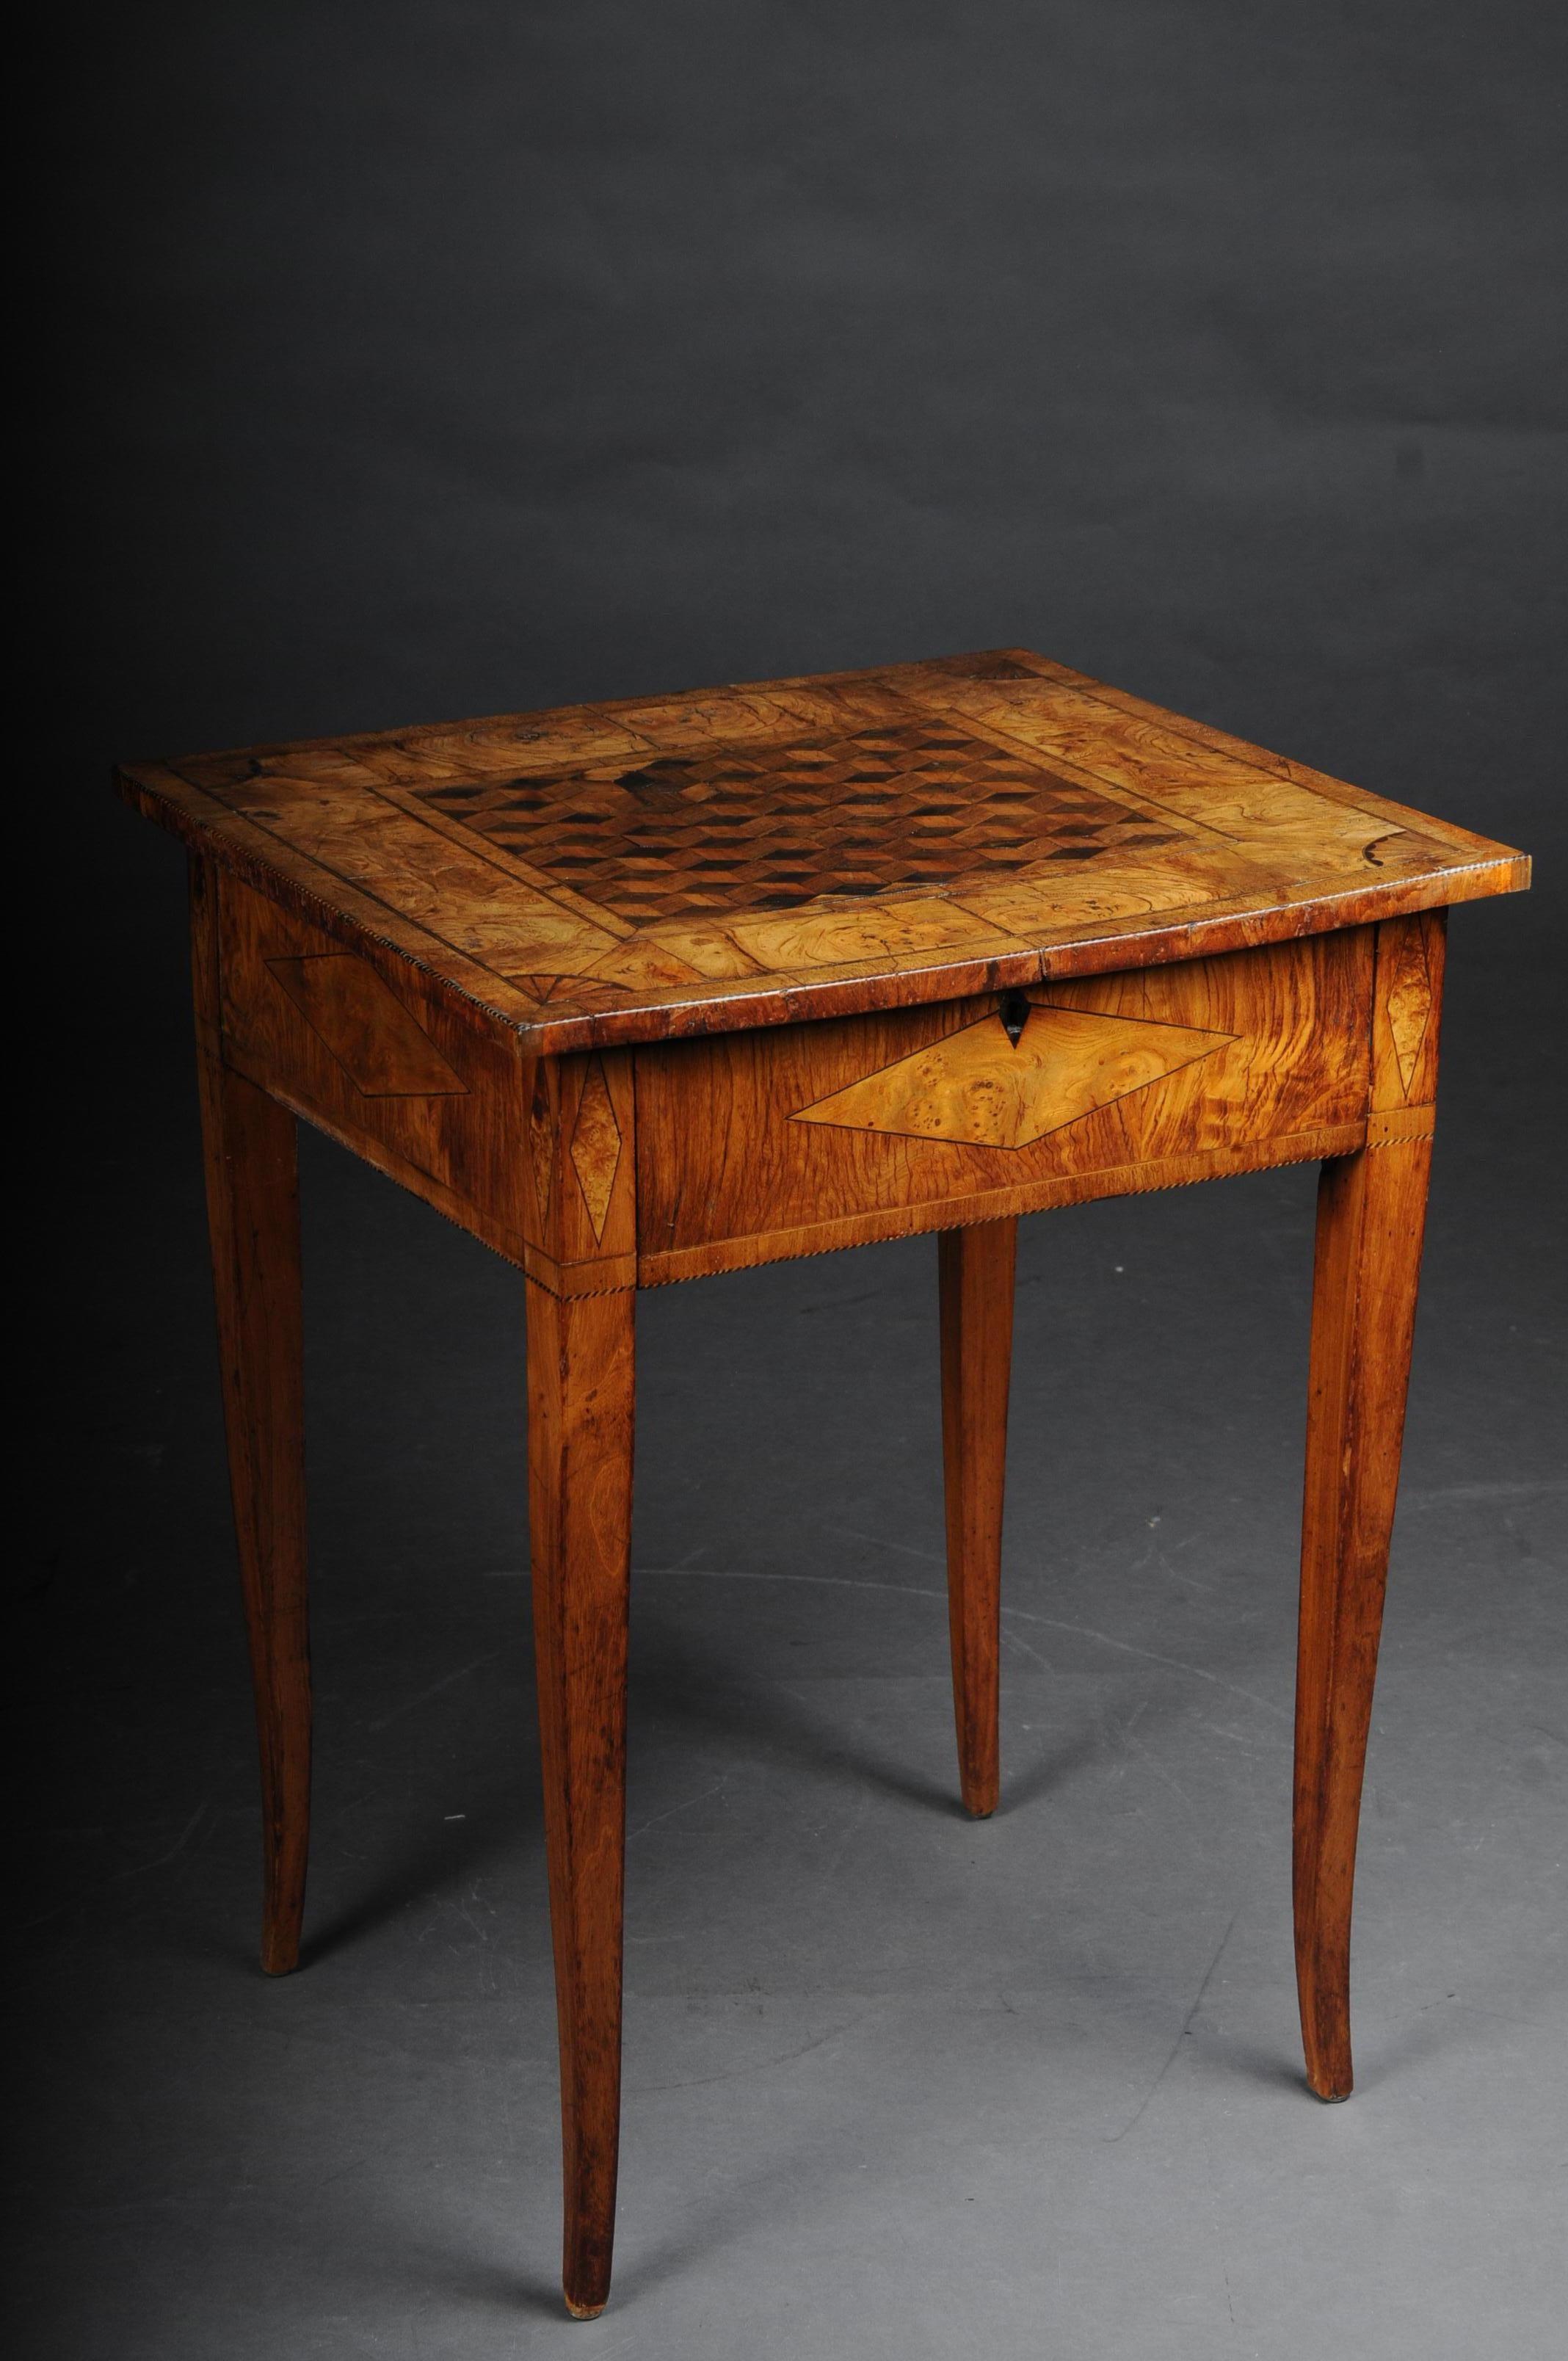 Classic side table classicism, circa 1810 ash, inlaid.

Solid wood veneered with ash. Sliding straight frame socket on pointed legs. Overhanging cover plate. Rich marquetry or cube inlaid. Cover plate edge framed with thread inlays.

(G-79).